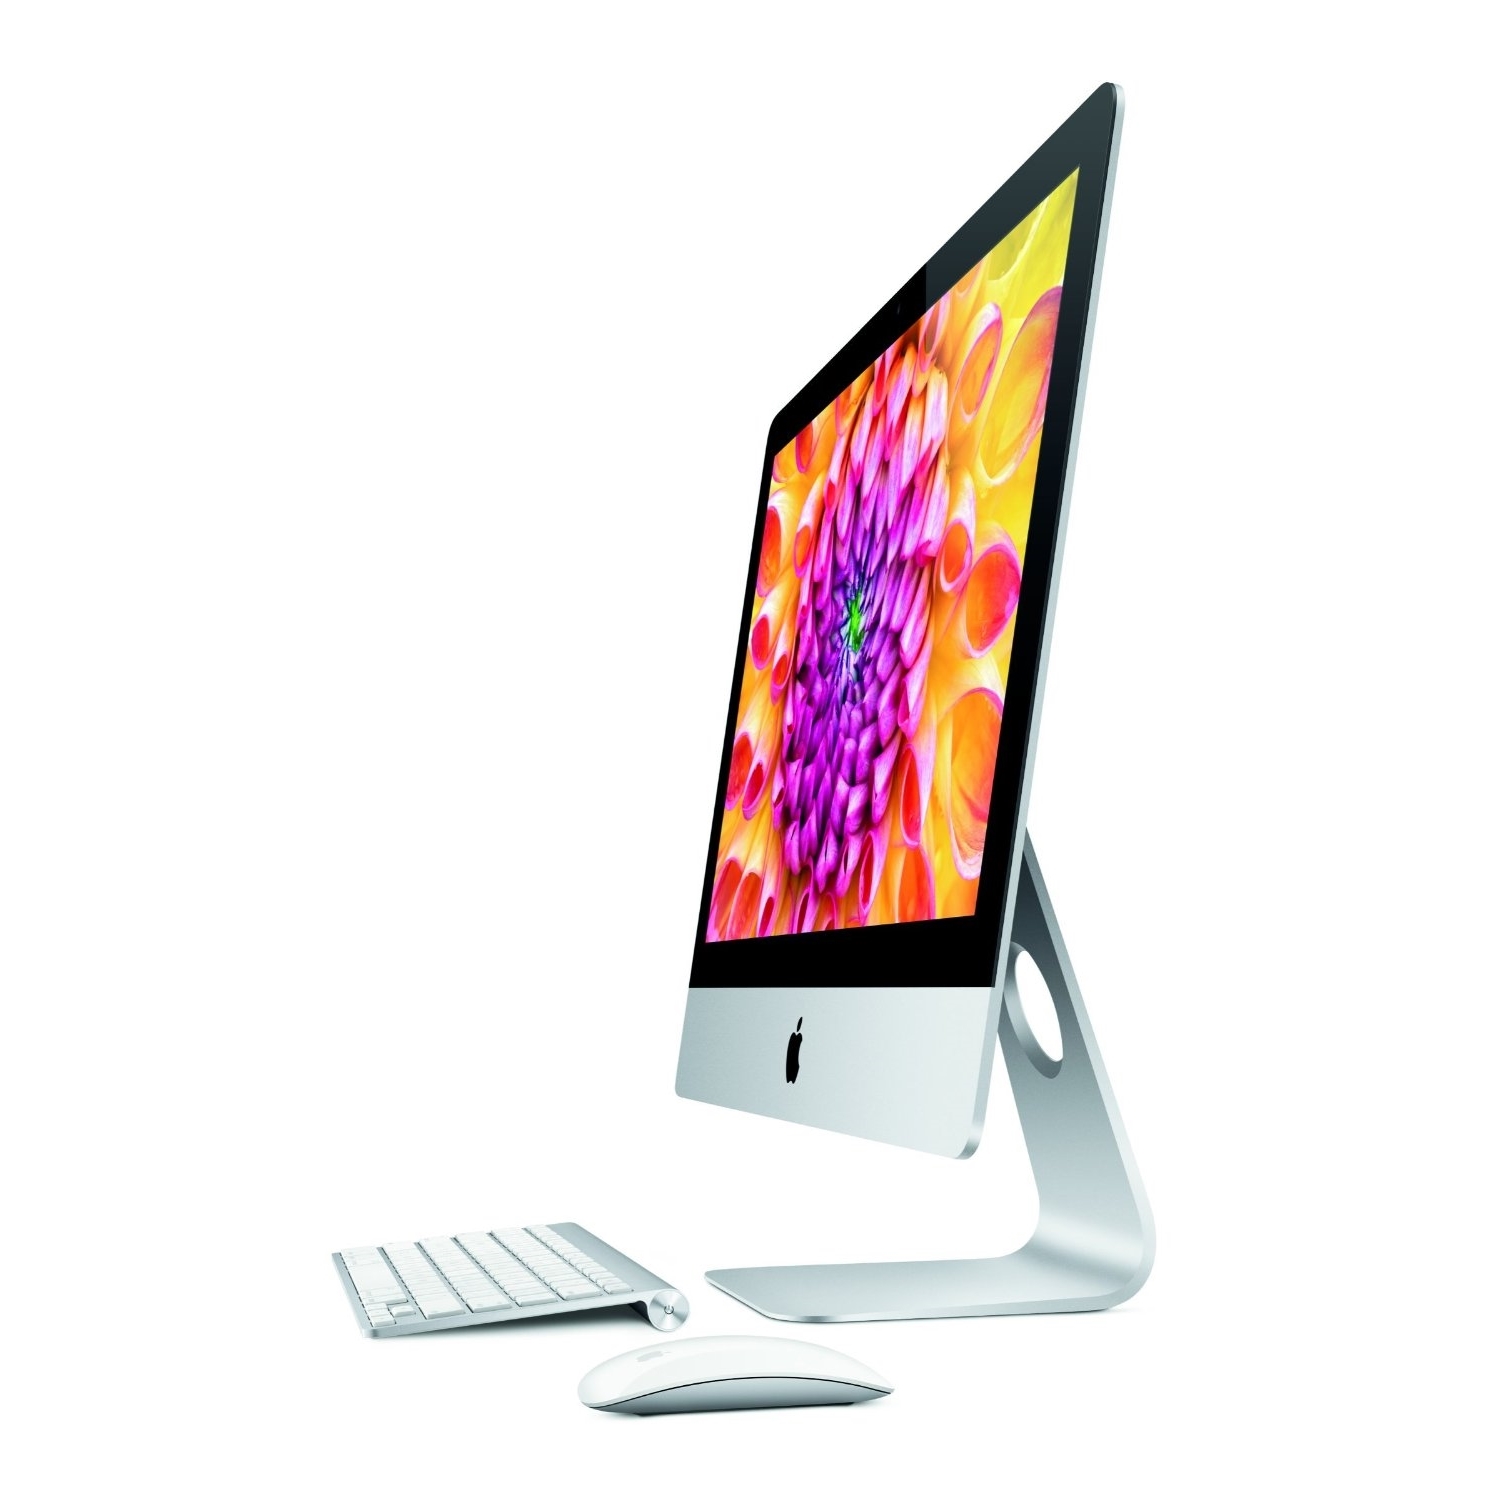 Apple iMac 27" Core i5-4570 Quad-Core 3.2GHz All-In-One Computer - 8GB 1TB GeForce GT 755M (Late 2013) - B